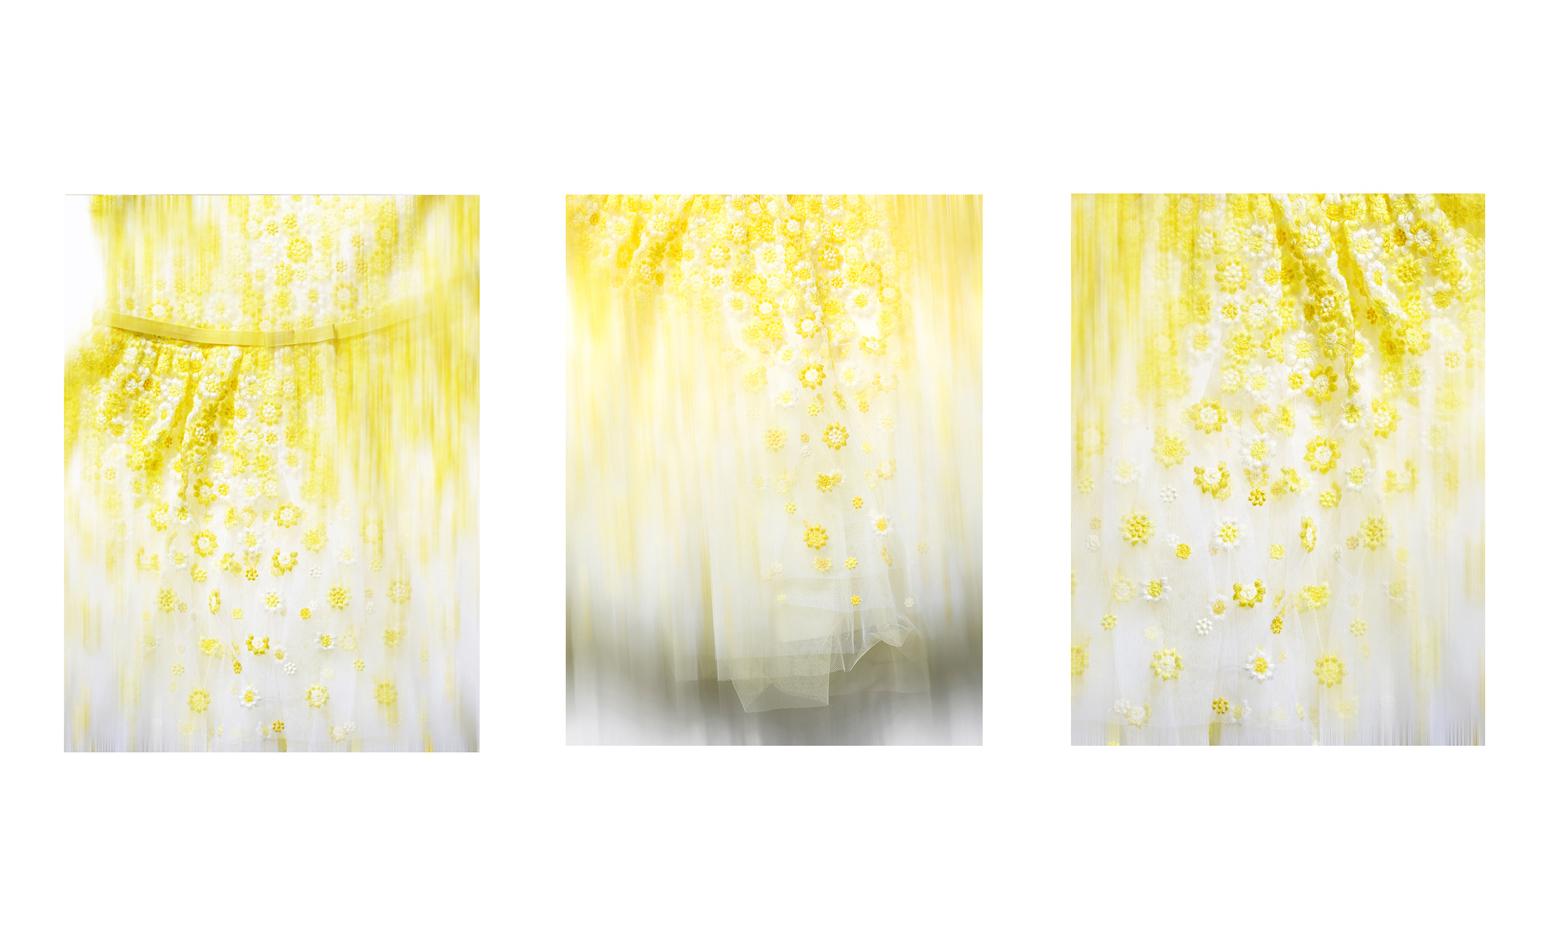 TULLE Triptych - abstact photographs of mesmerizing texture details (64x48")